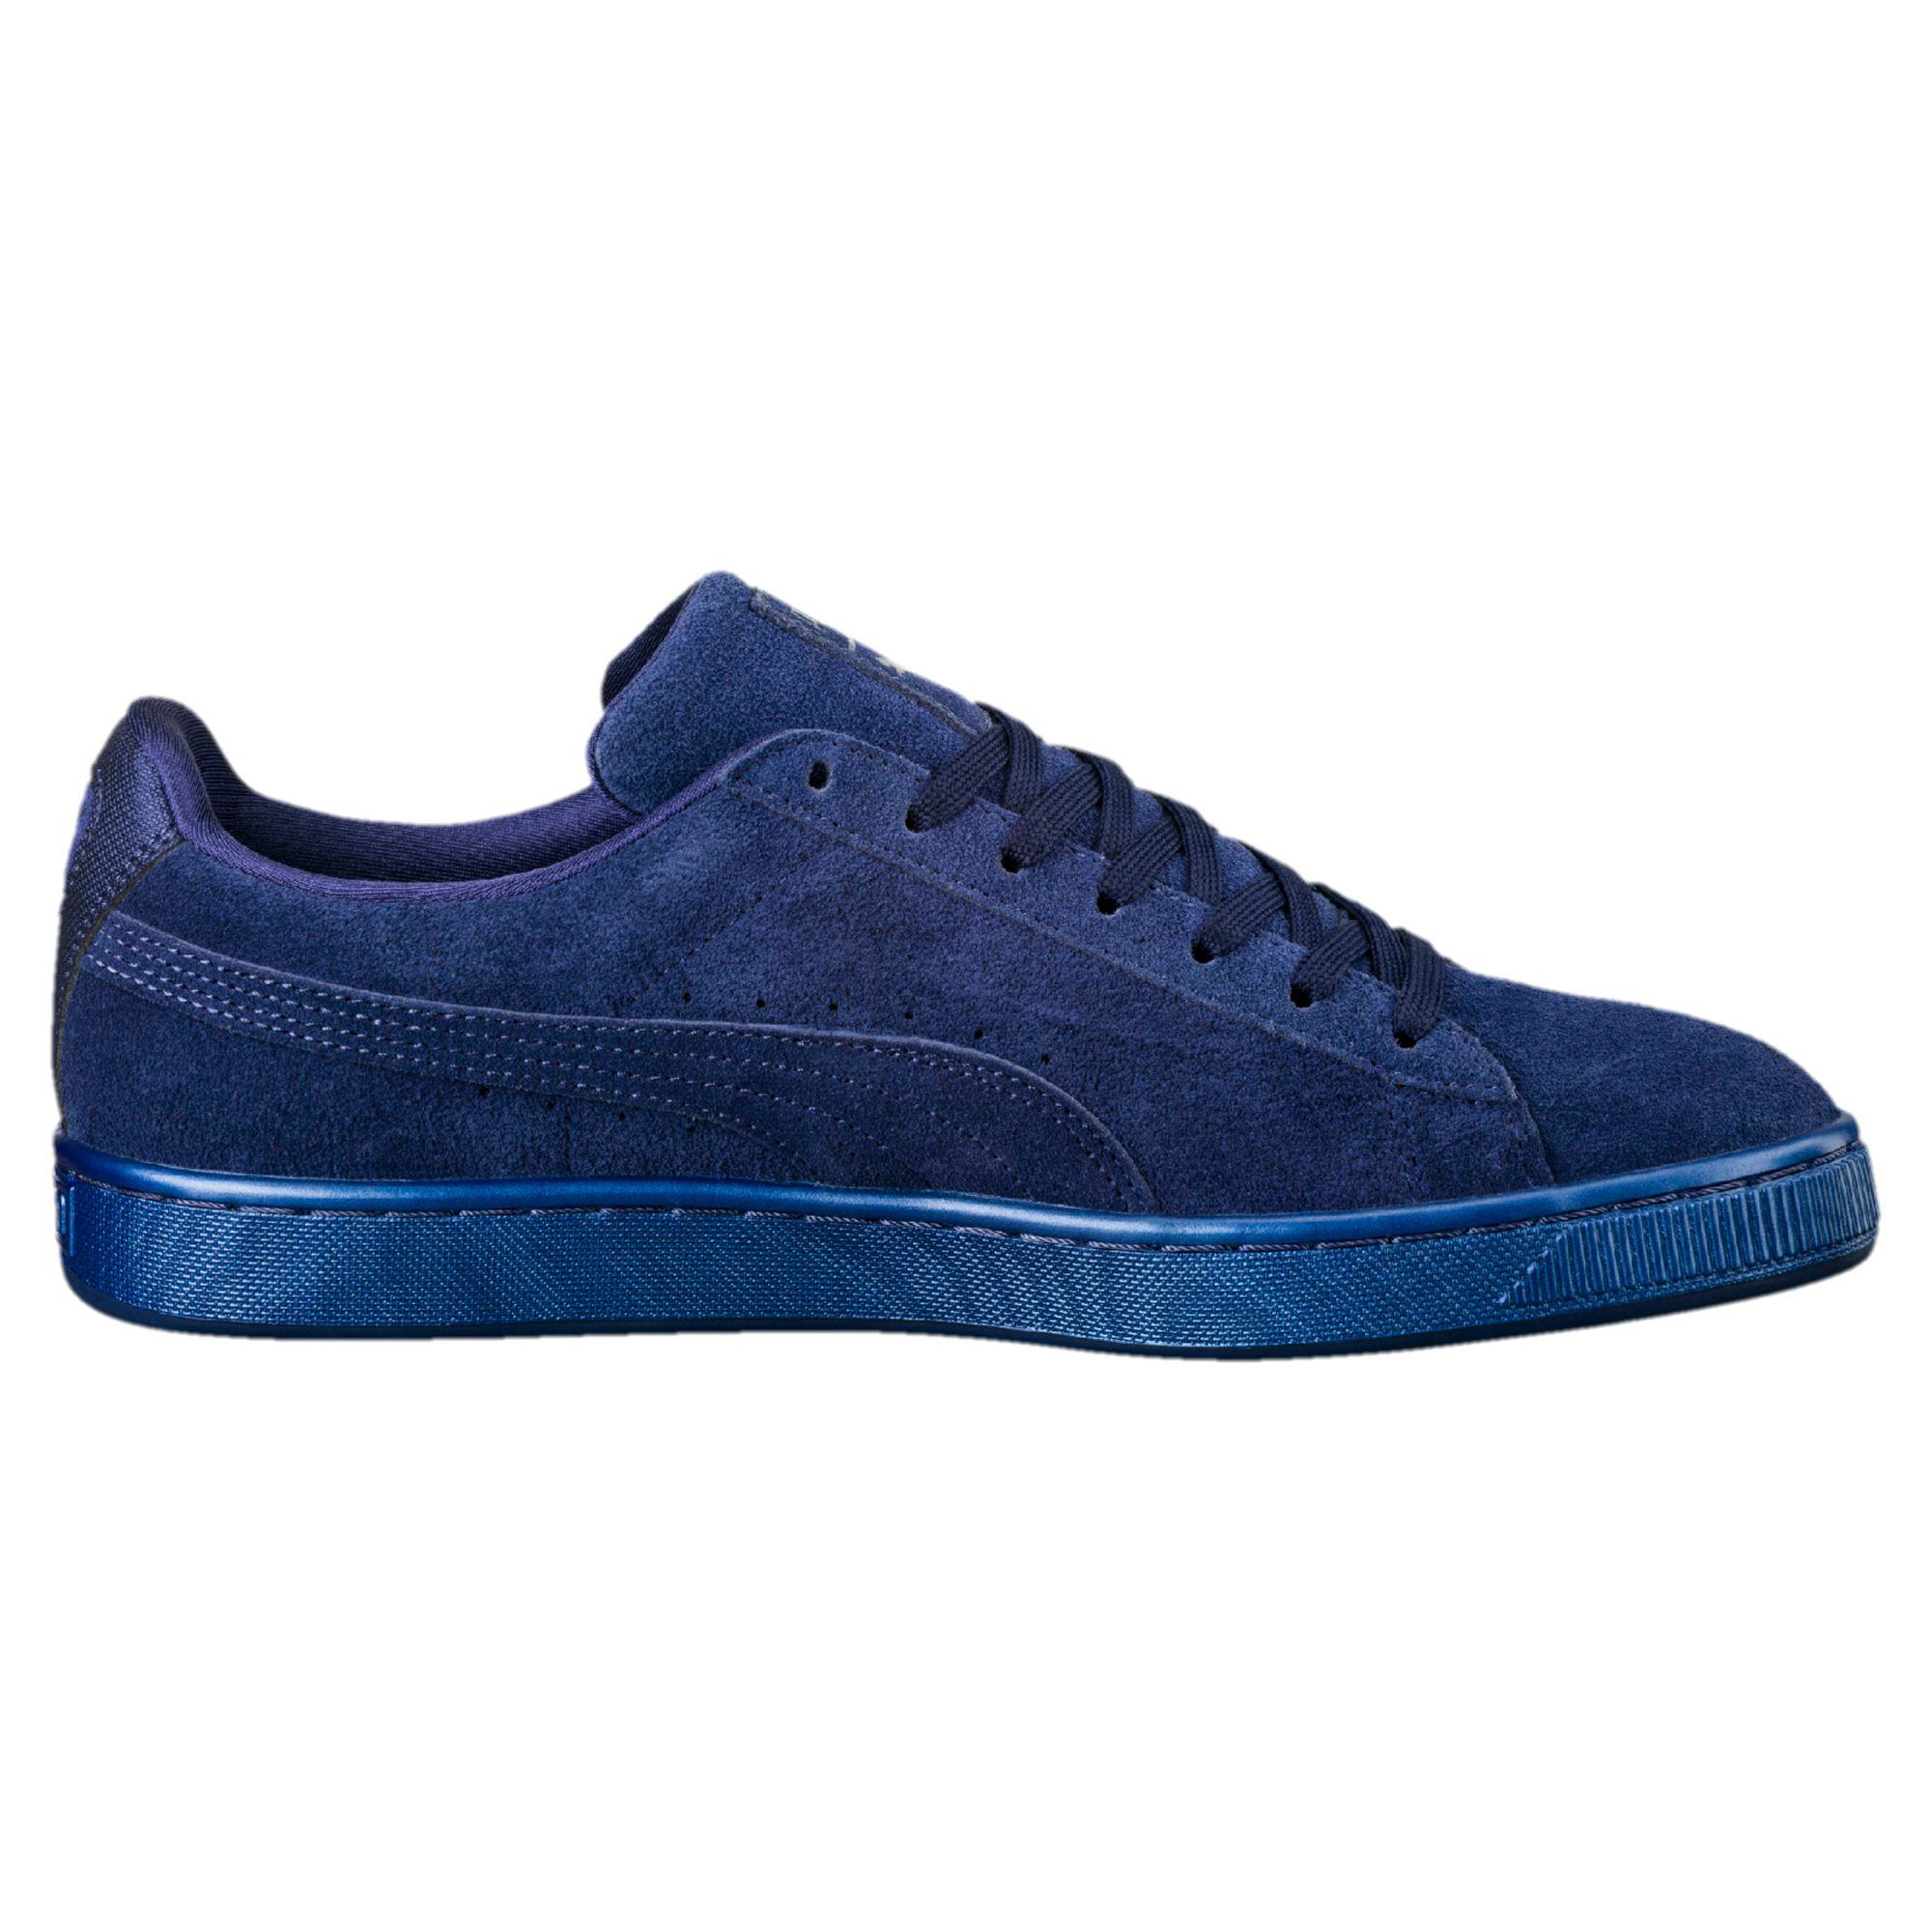 PUMA Suede Classic Anodized Sneakers in Blue for Men - Lyst